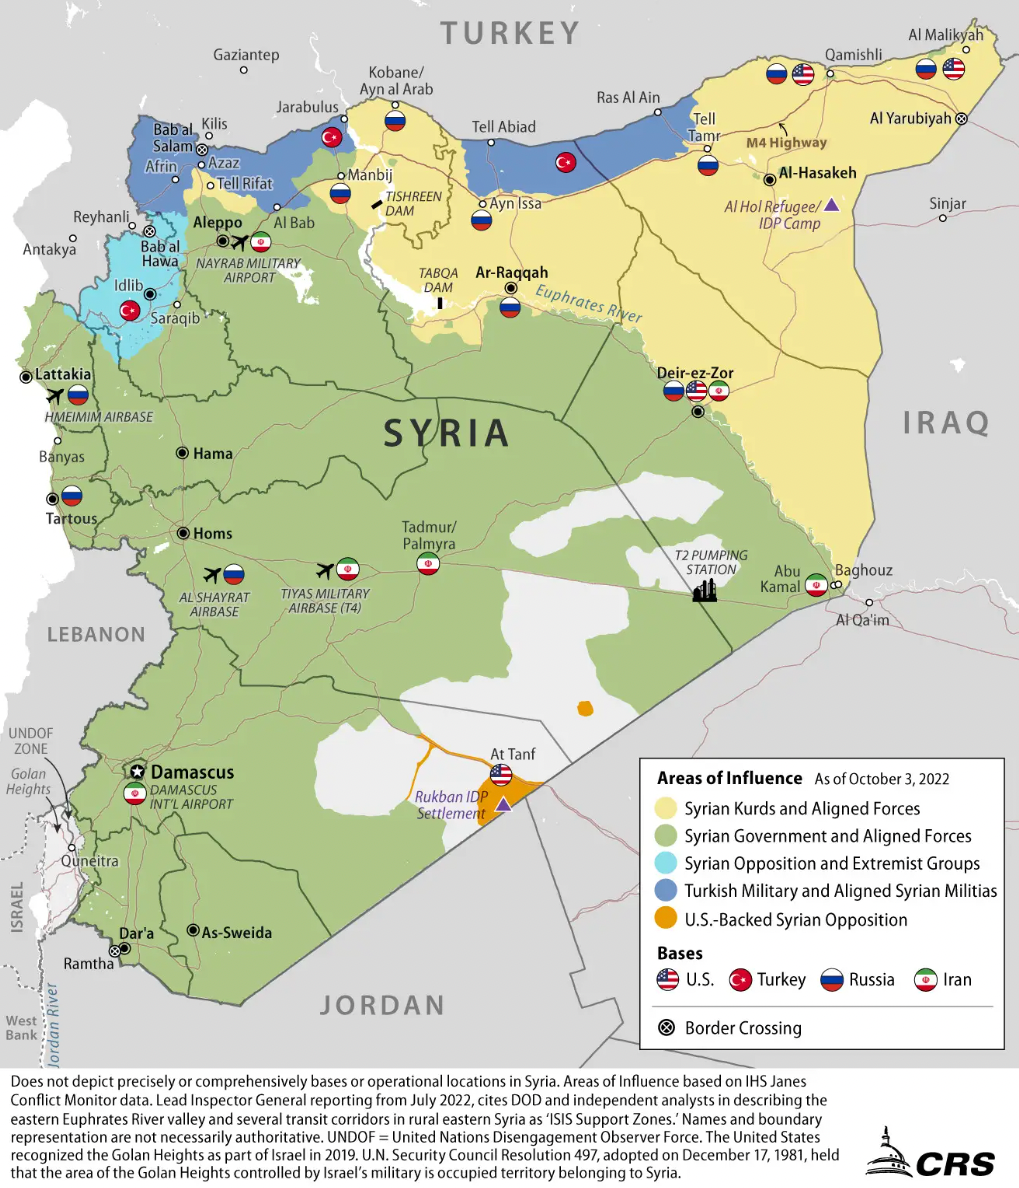 A map showing the general disposition of U.S., Russian, and other forces in Syria as of October 2022. <em>Congressional Research Service</em>